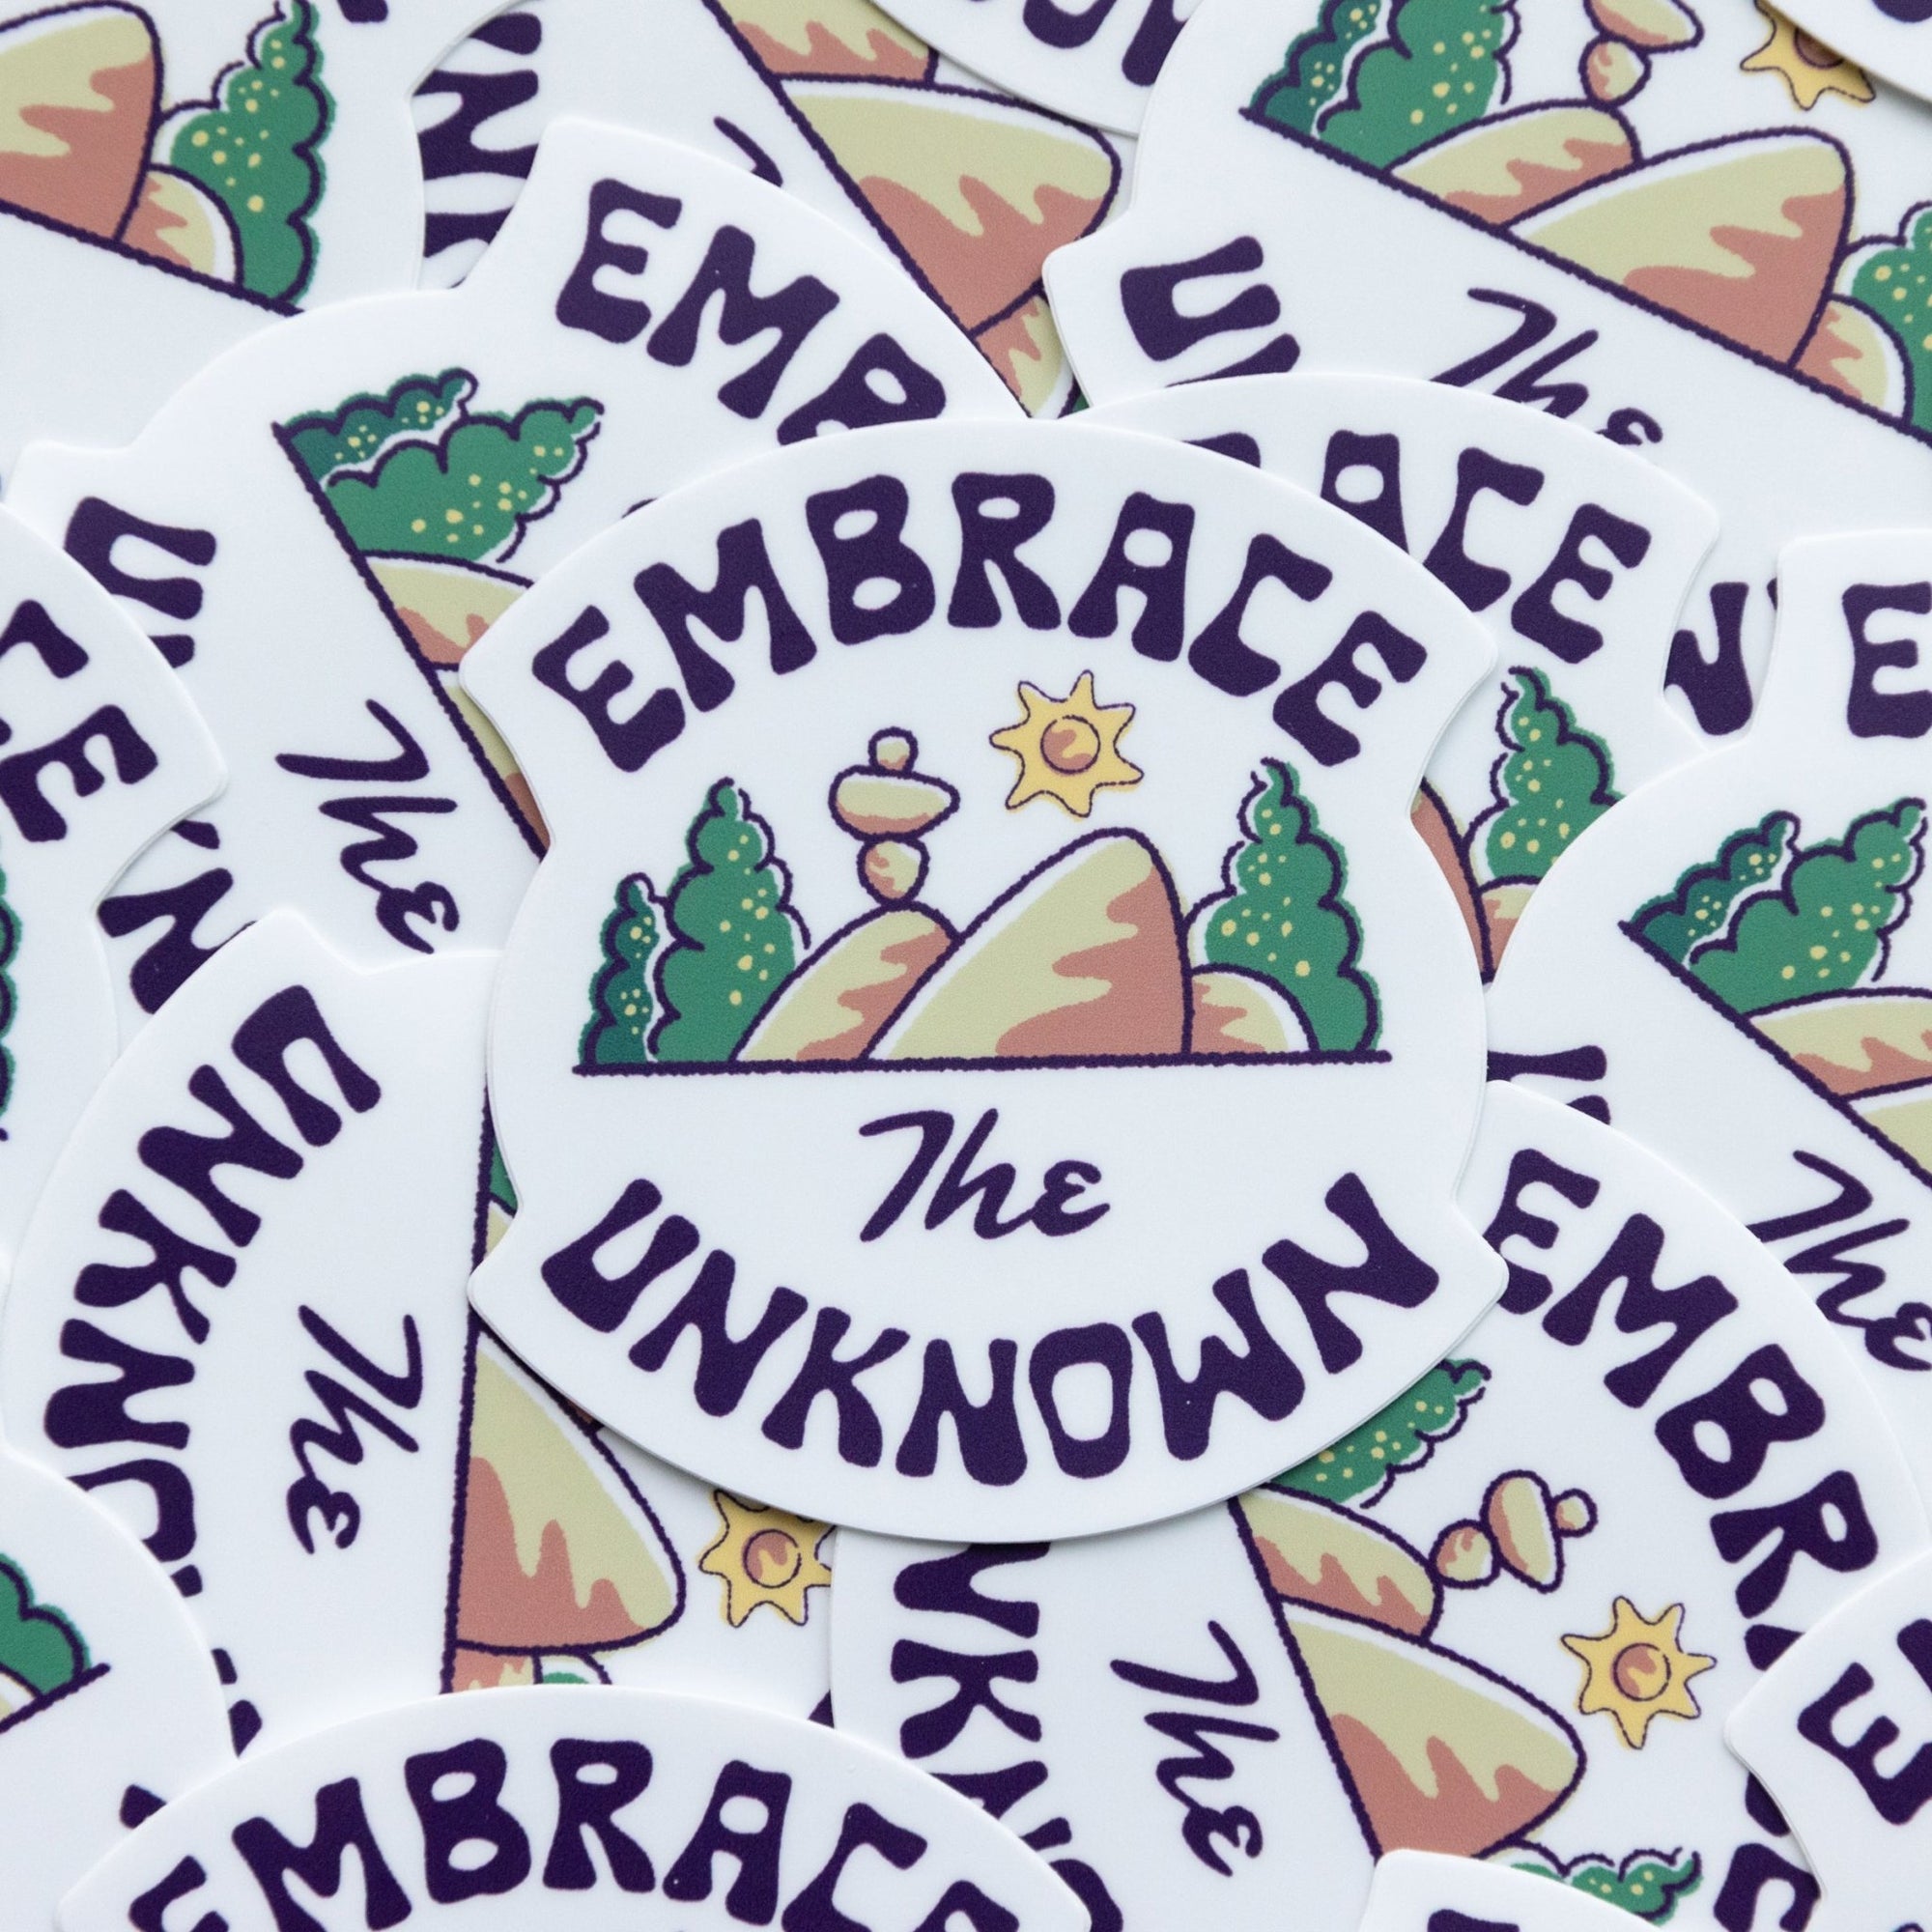 Embrace the Unknown - menottees